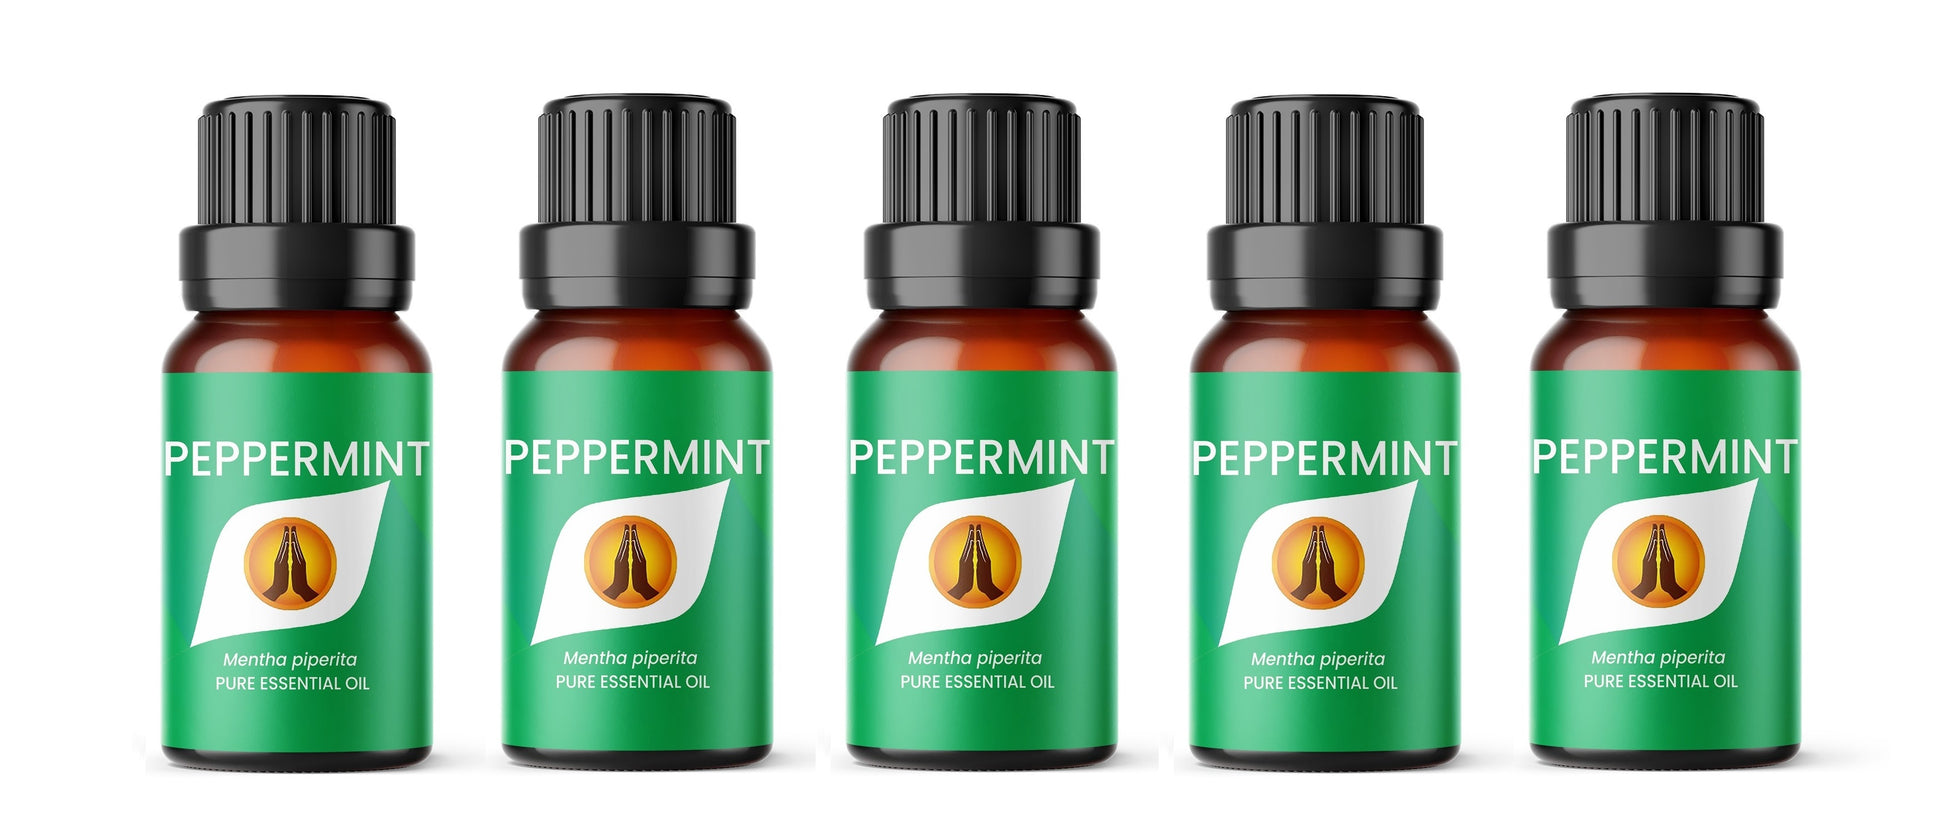 Peppermint Pure Essential Oil - Aroma Energy